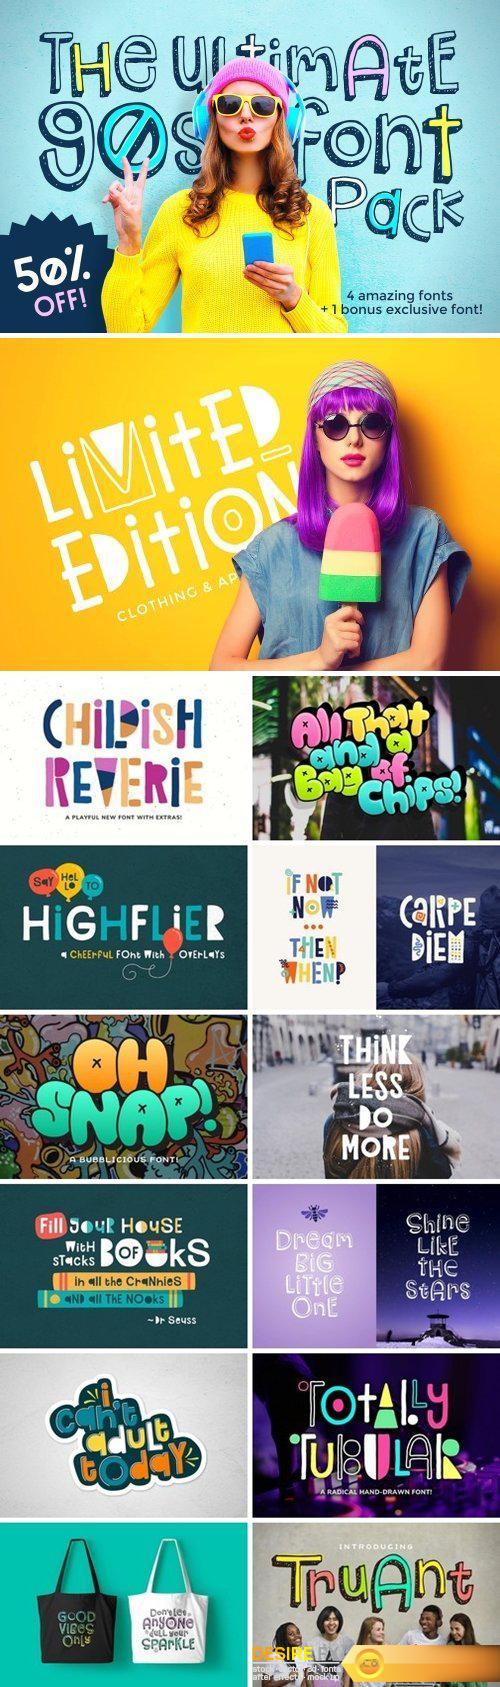 CM - The Ultimate 90s Font Pack 1570114